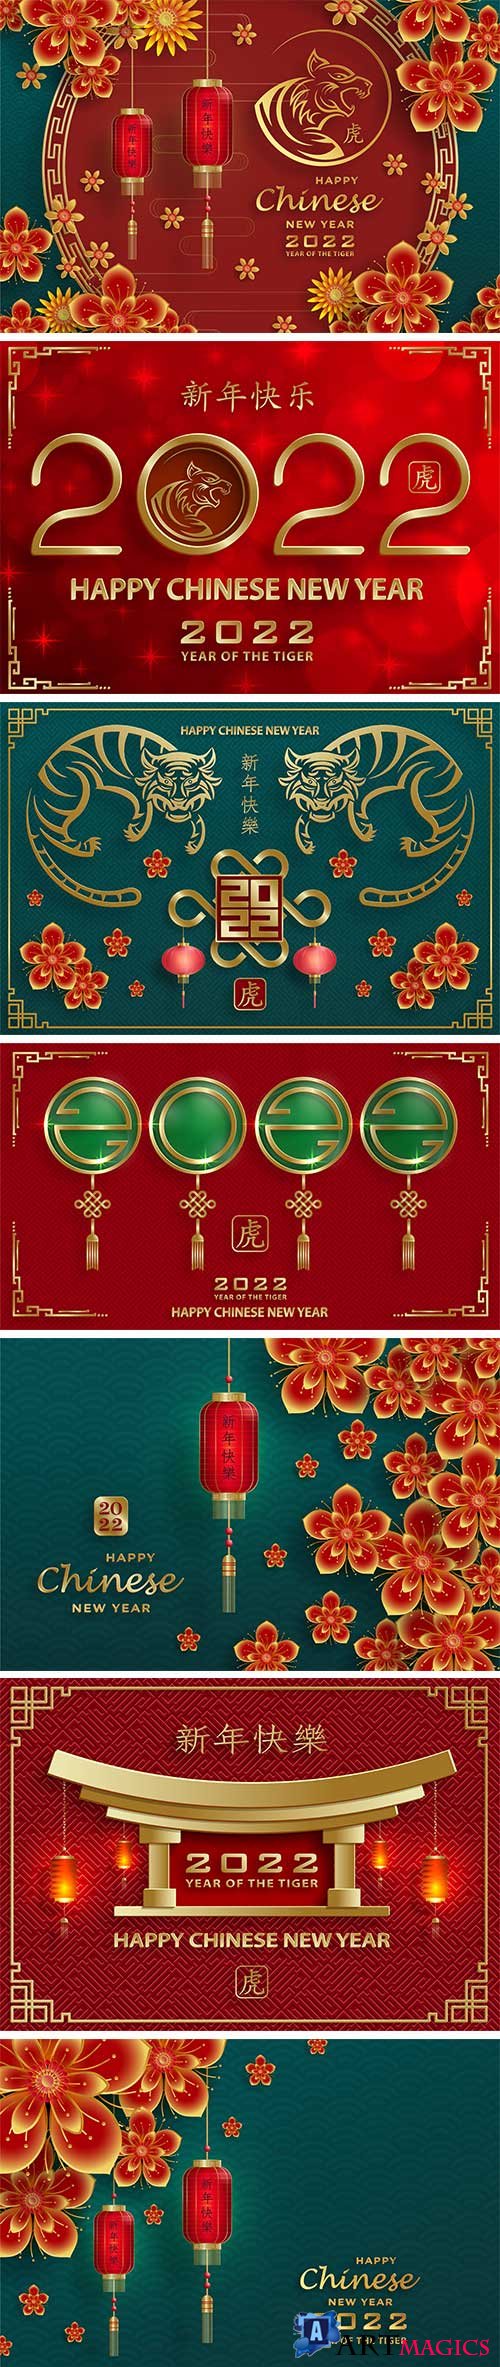 Vector chinese new year 2022